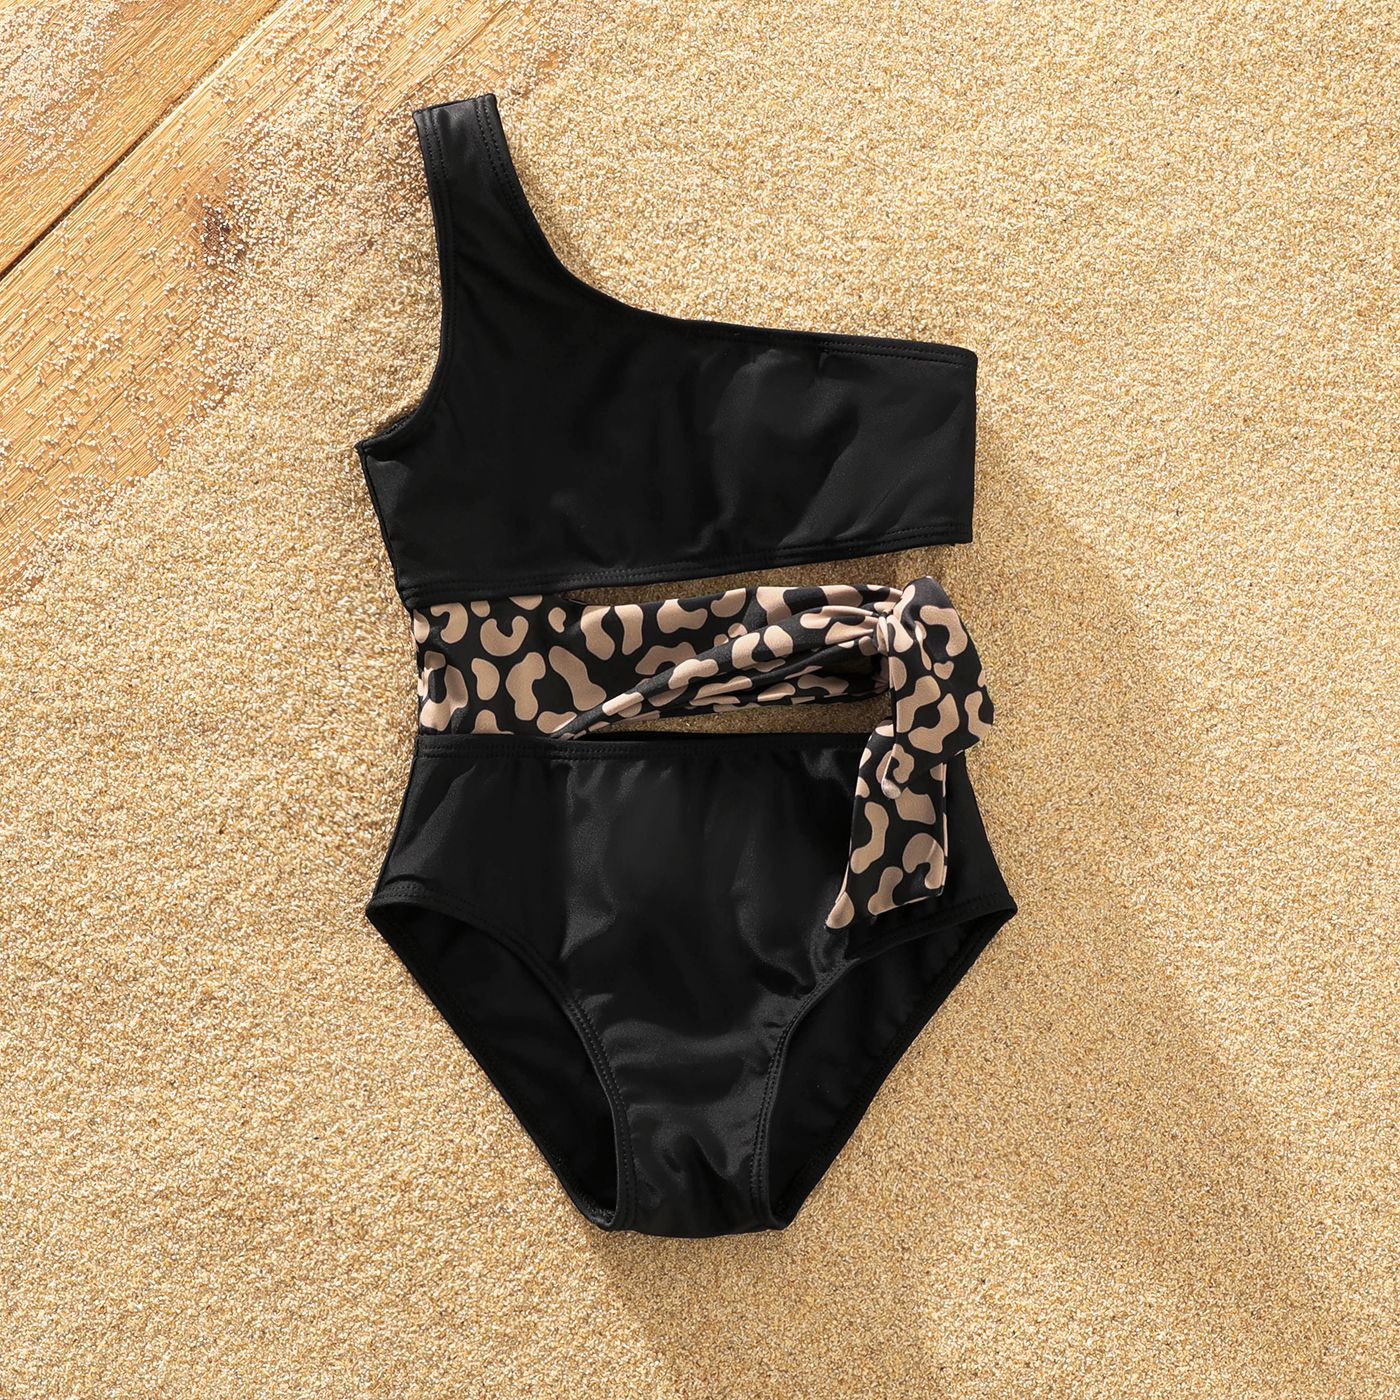 Family Matching Leopard Splice Black Swim Trunks Shorts And One Shoulder Self Tie One-Piece Swimsuit